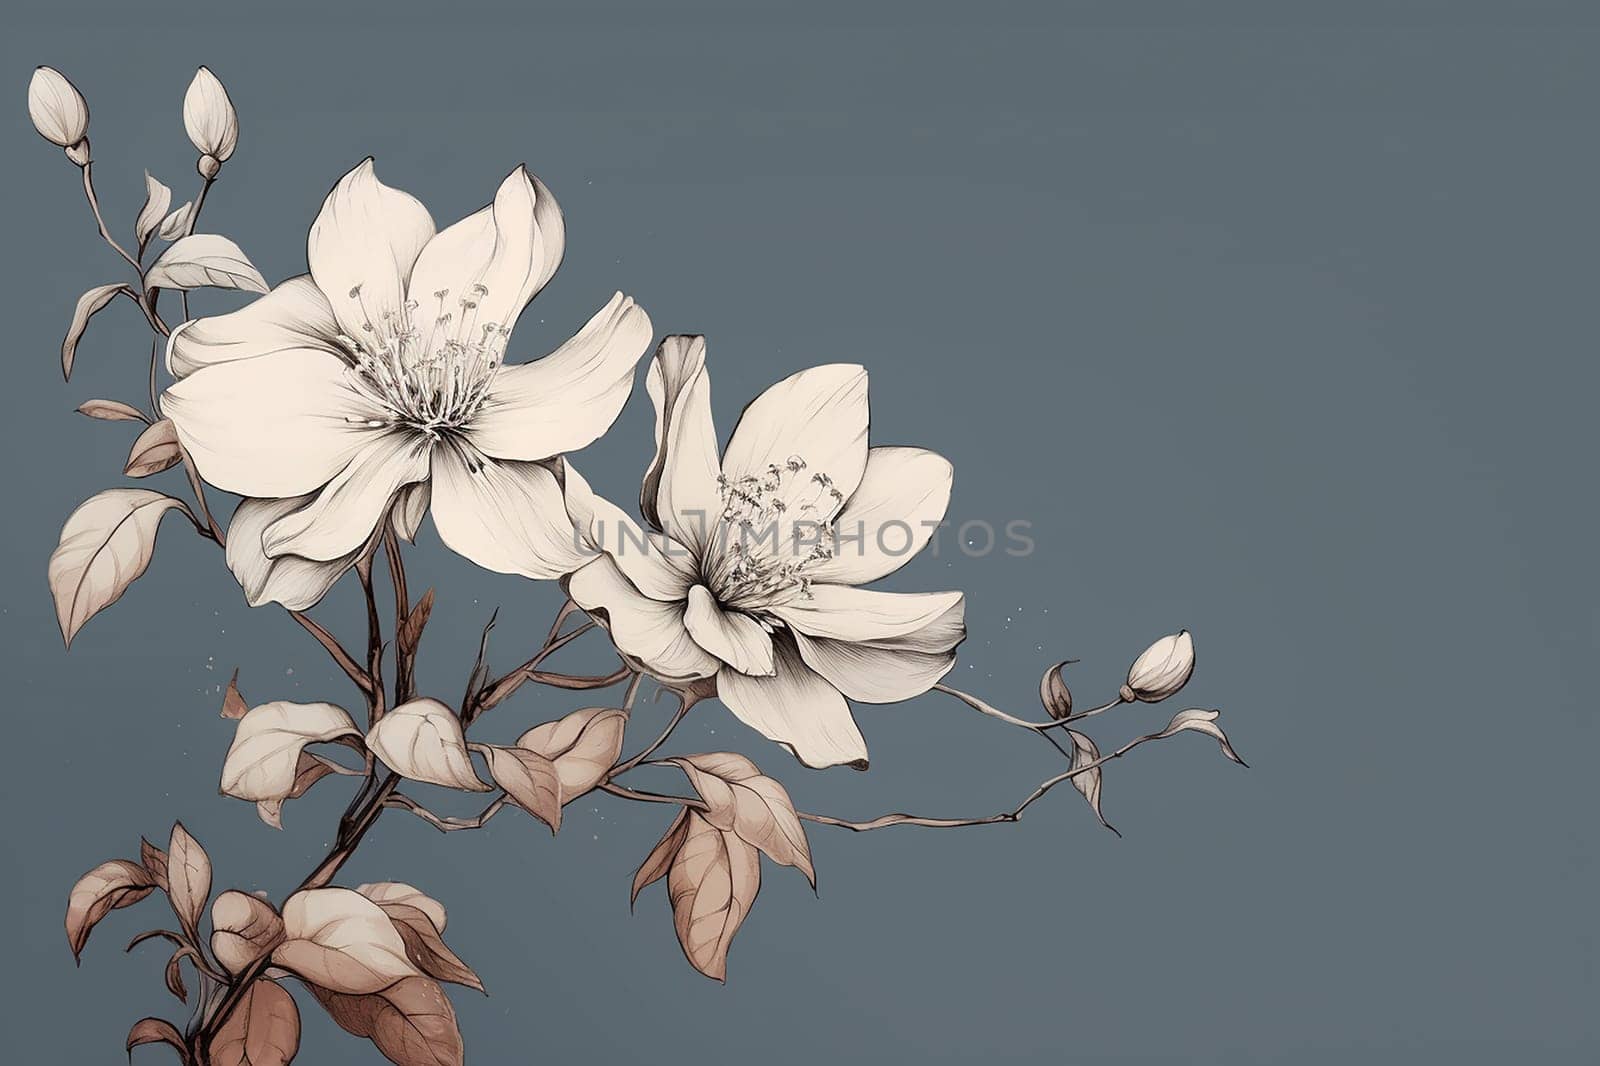 Monochrome illustration of blooming flowers against a plain background by Hype2art